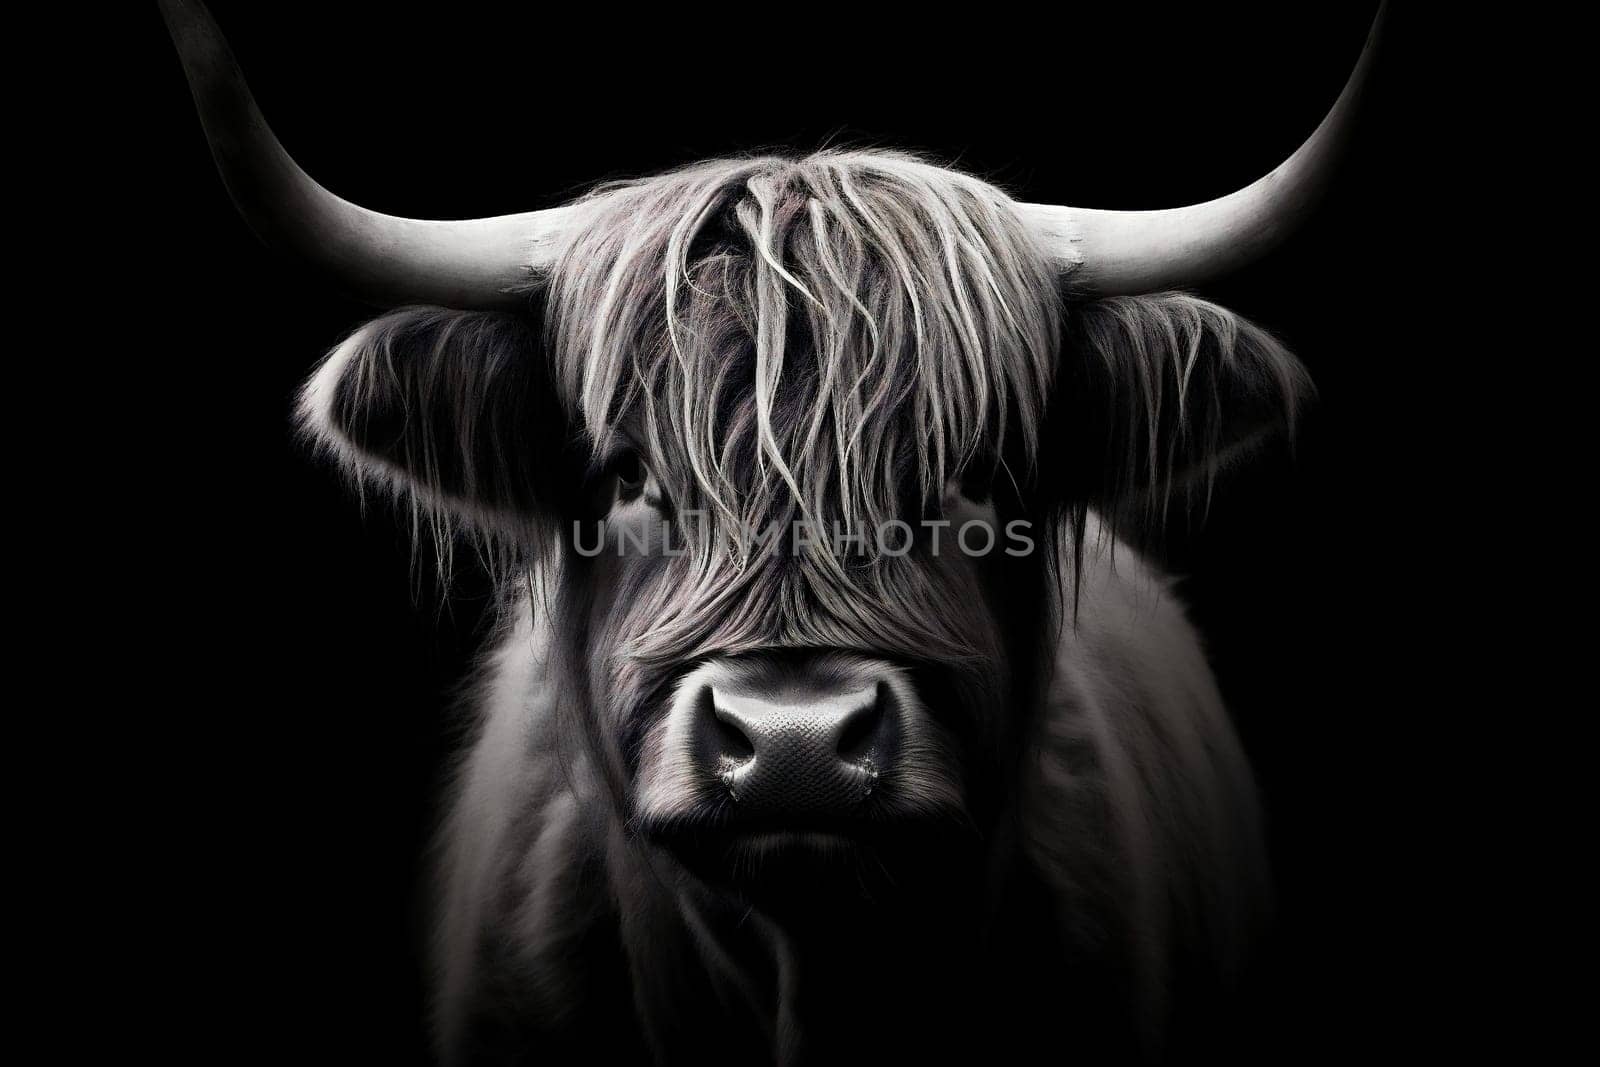 Farming grass field nature livestock portrait meadow brown horn cattle agriculture beef hairy highland animal rural pasture mammal cow scotland bull scottish hair